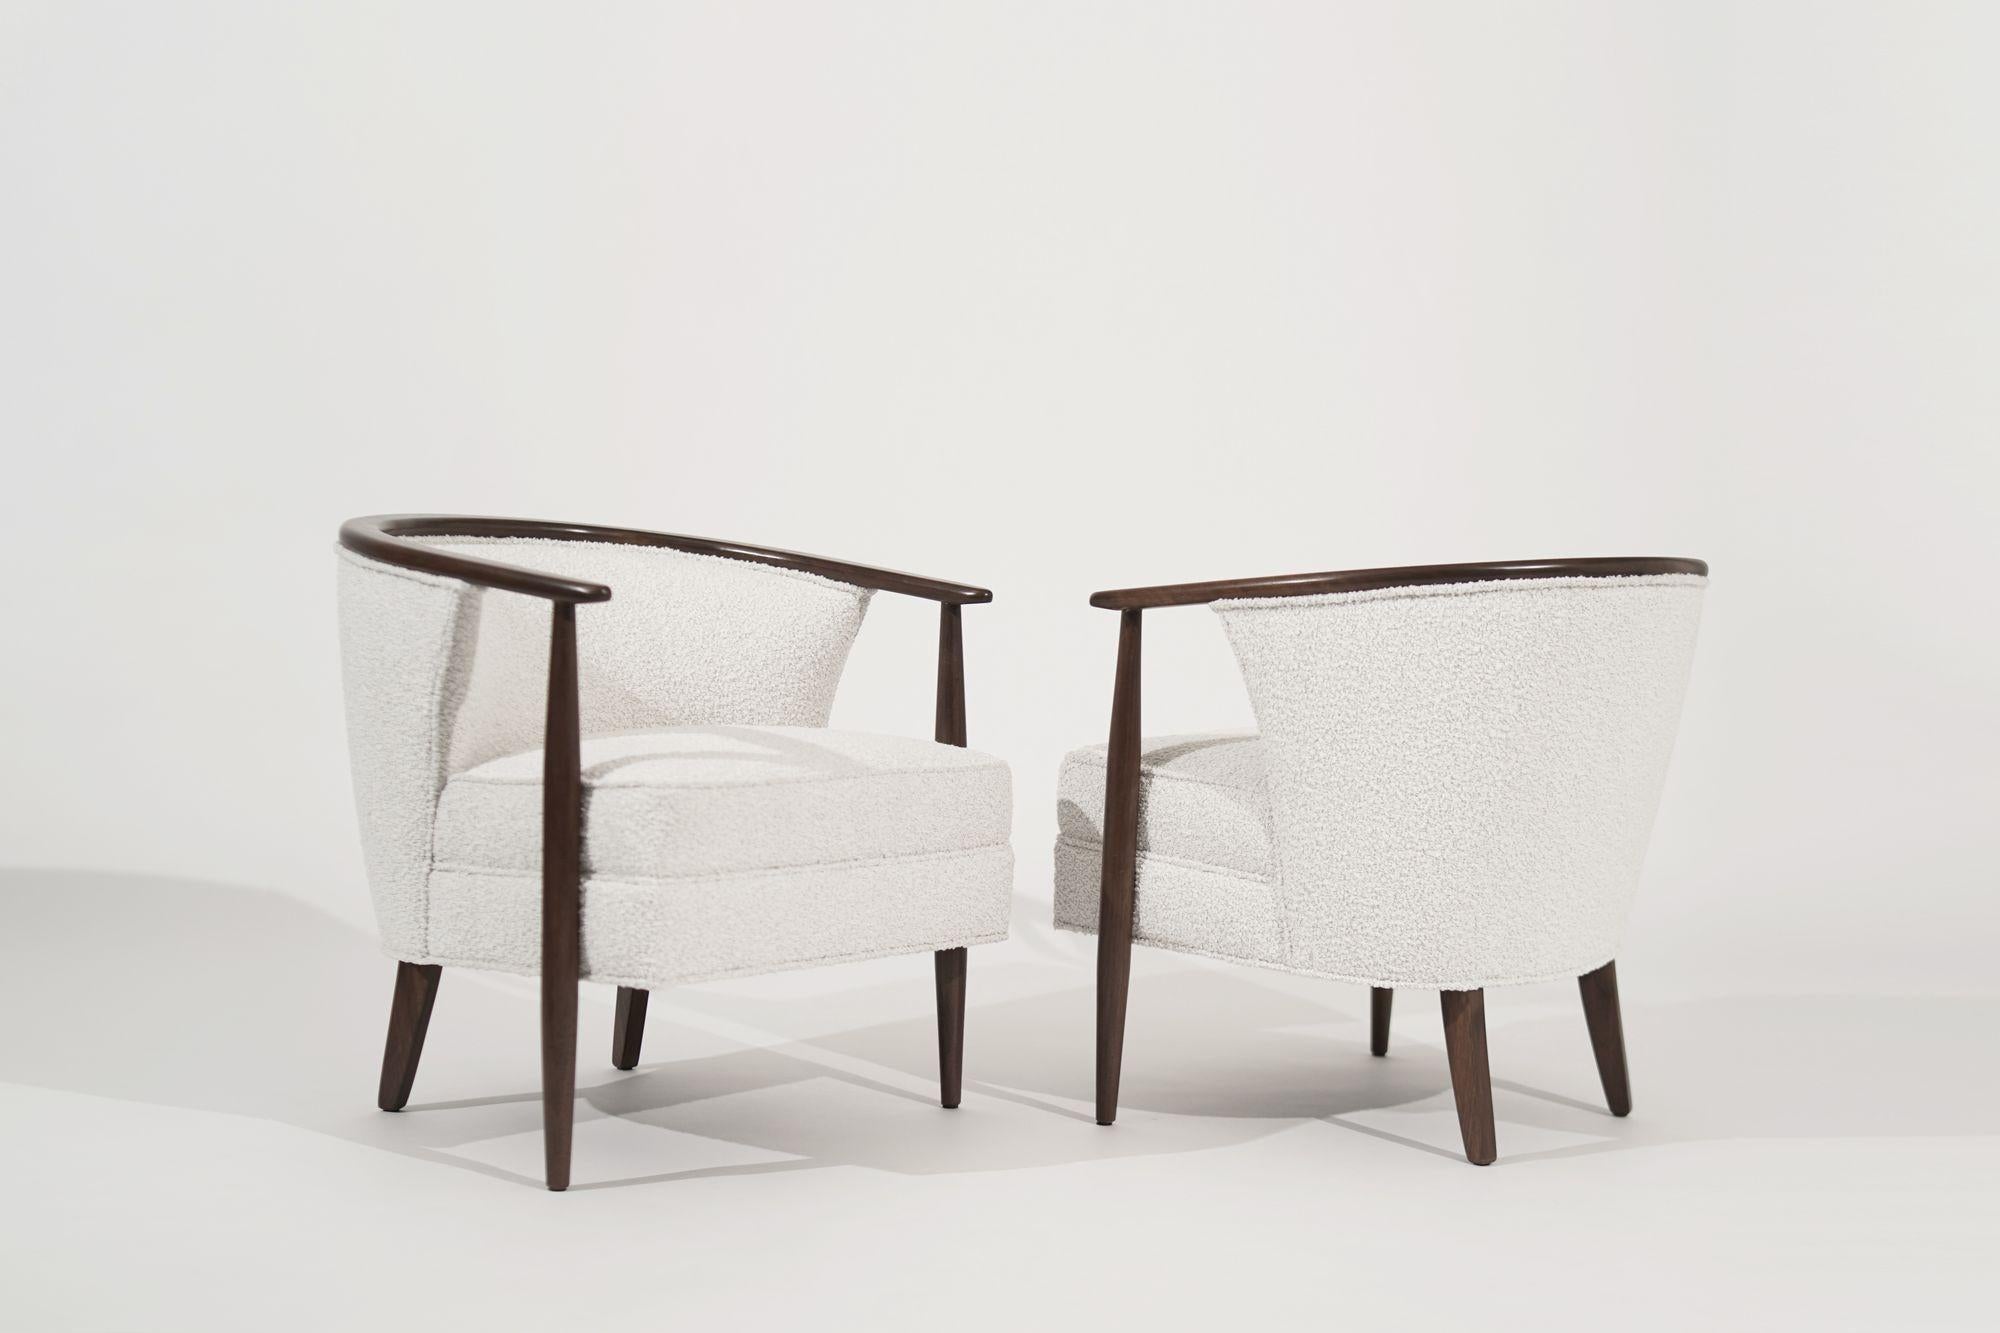 A pair of stunning sculptural chairs by Kodawood, circa 1960s, now fully restored. These chairs are a true celebration of mid-century modern design, featuring elegant curves and bold lines that create a sense of movement and fluidity.
Crafted from